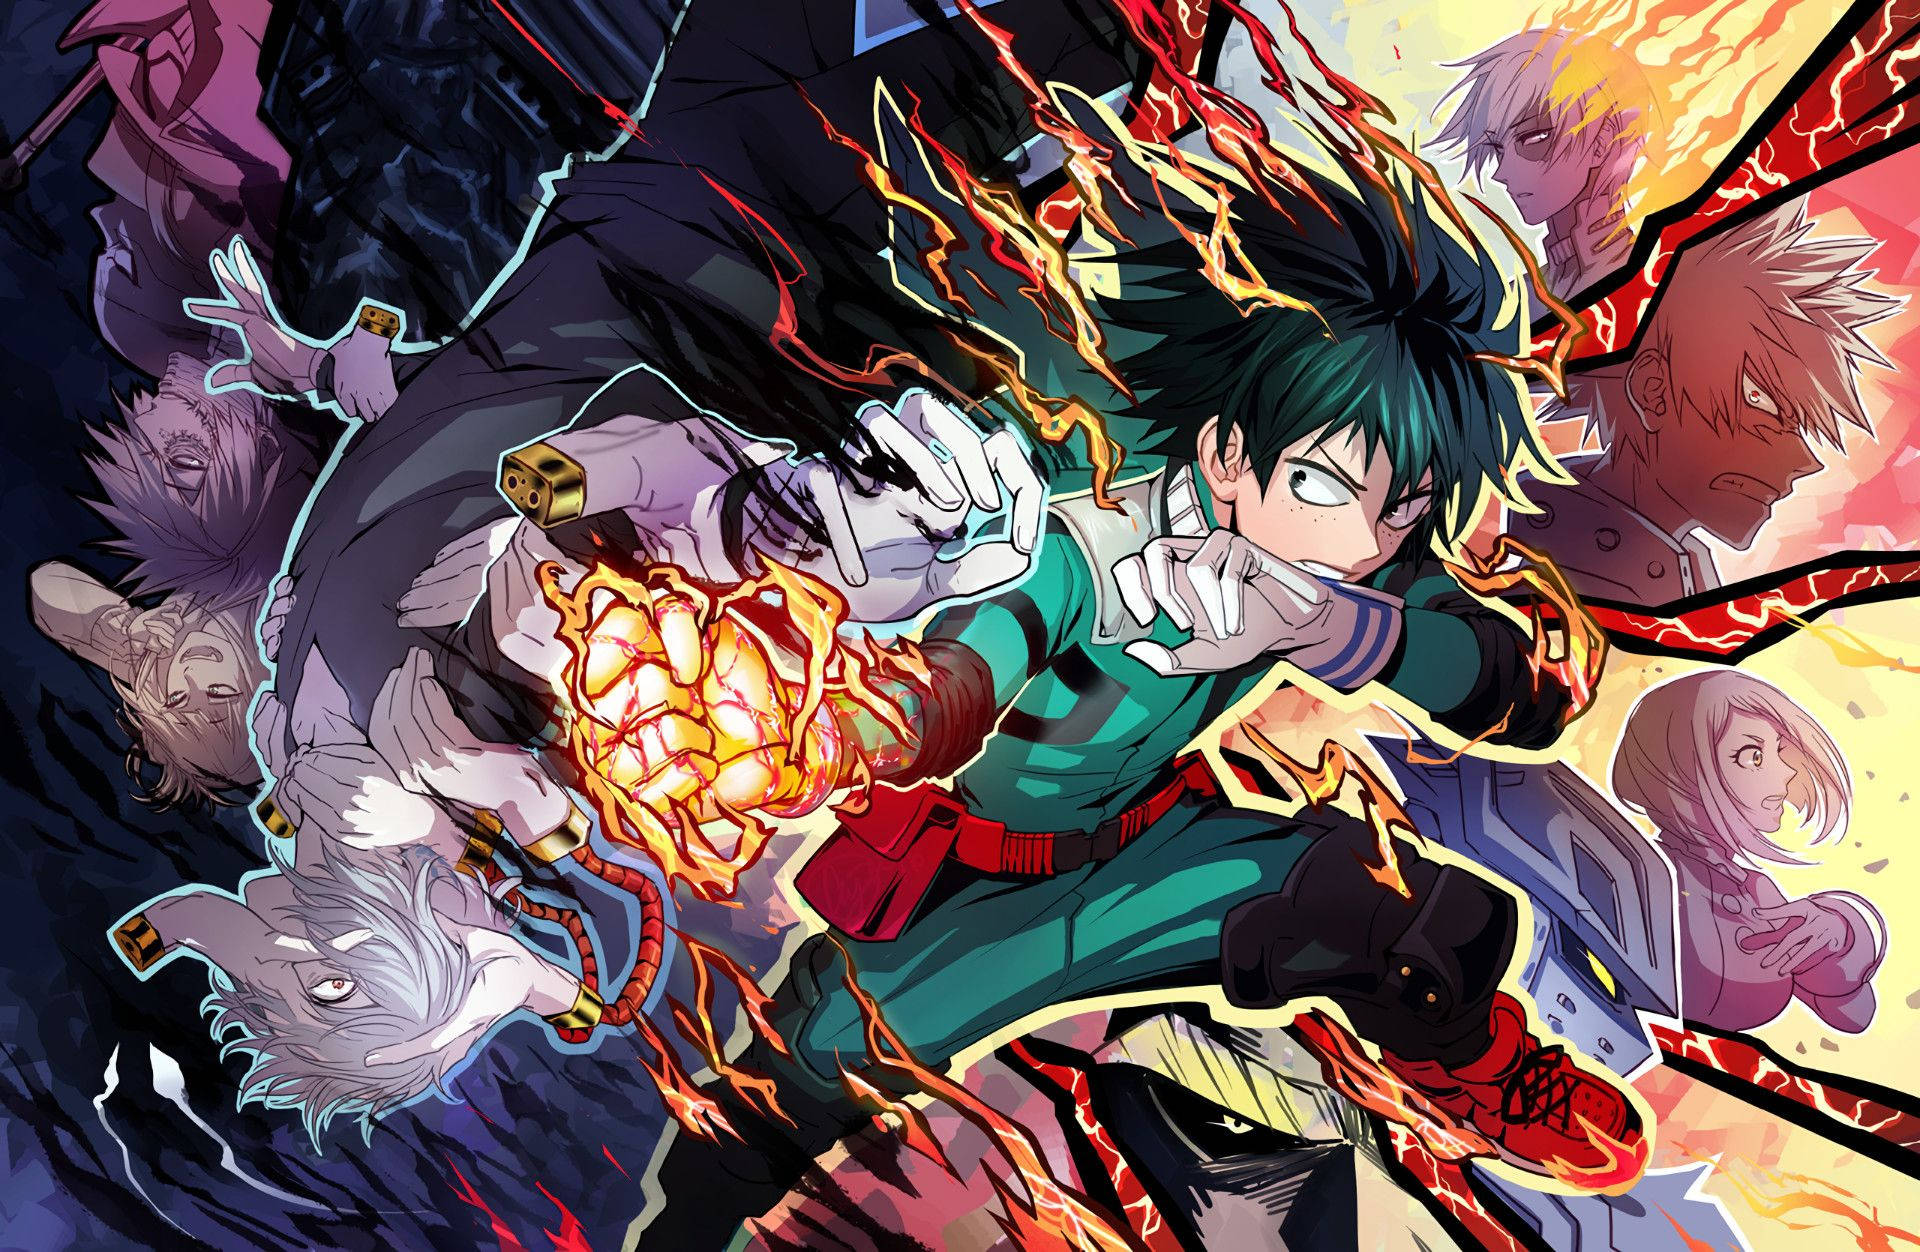 Powered by Fire and Ice, Todoroki Shoto stands ready to face any challenge Wallpaper